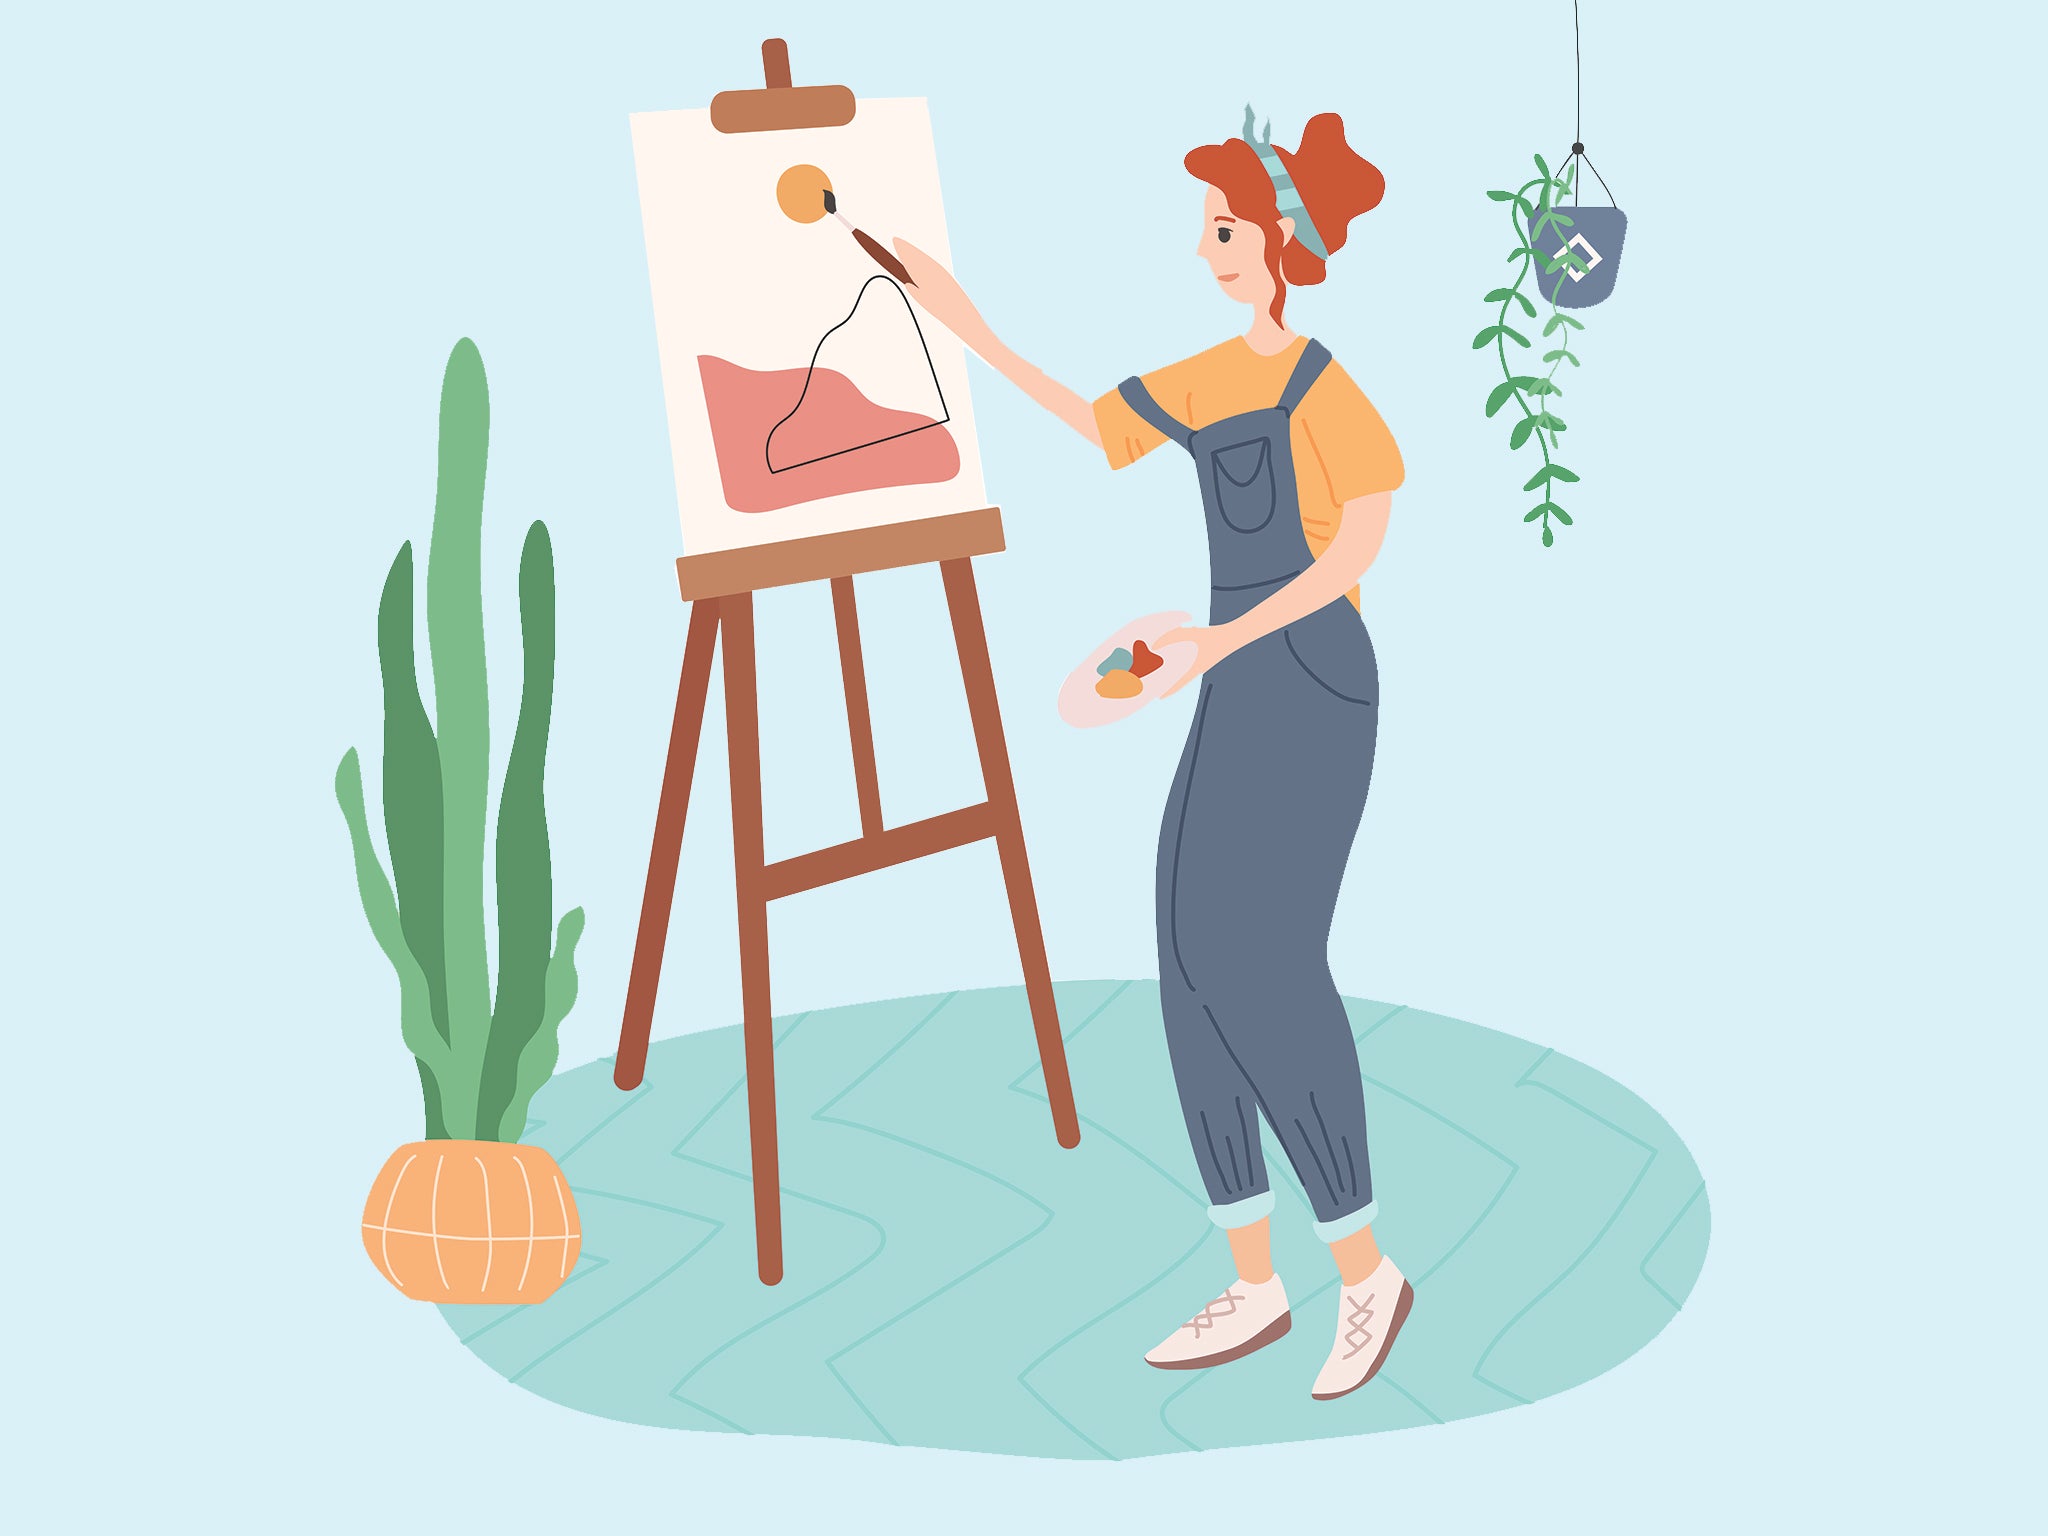 Art for beginners: How to draw, paint and more, according to